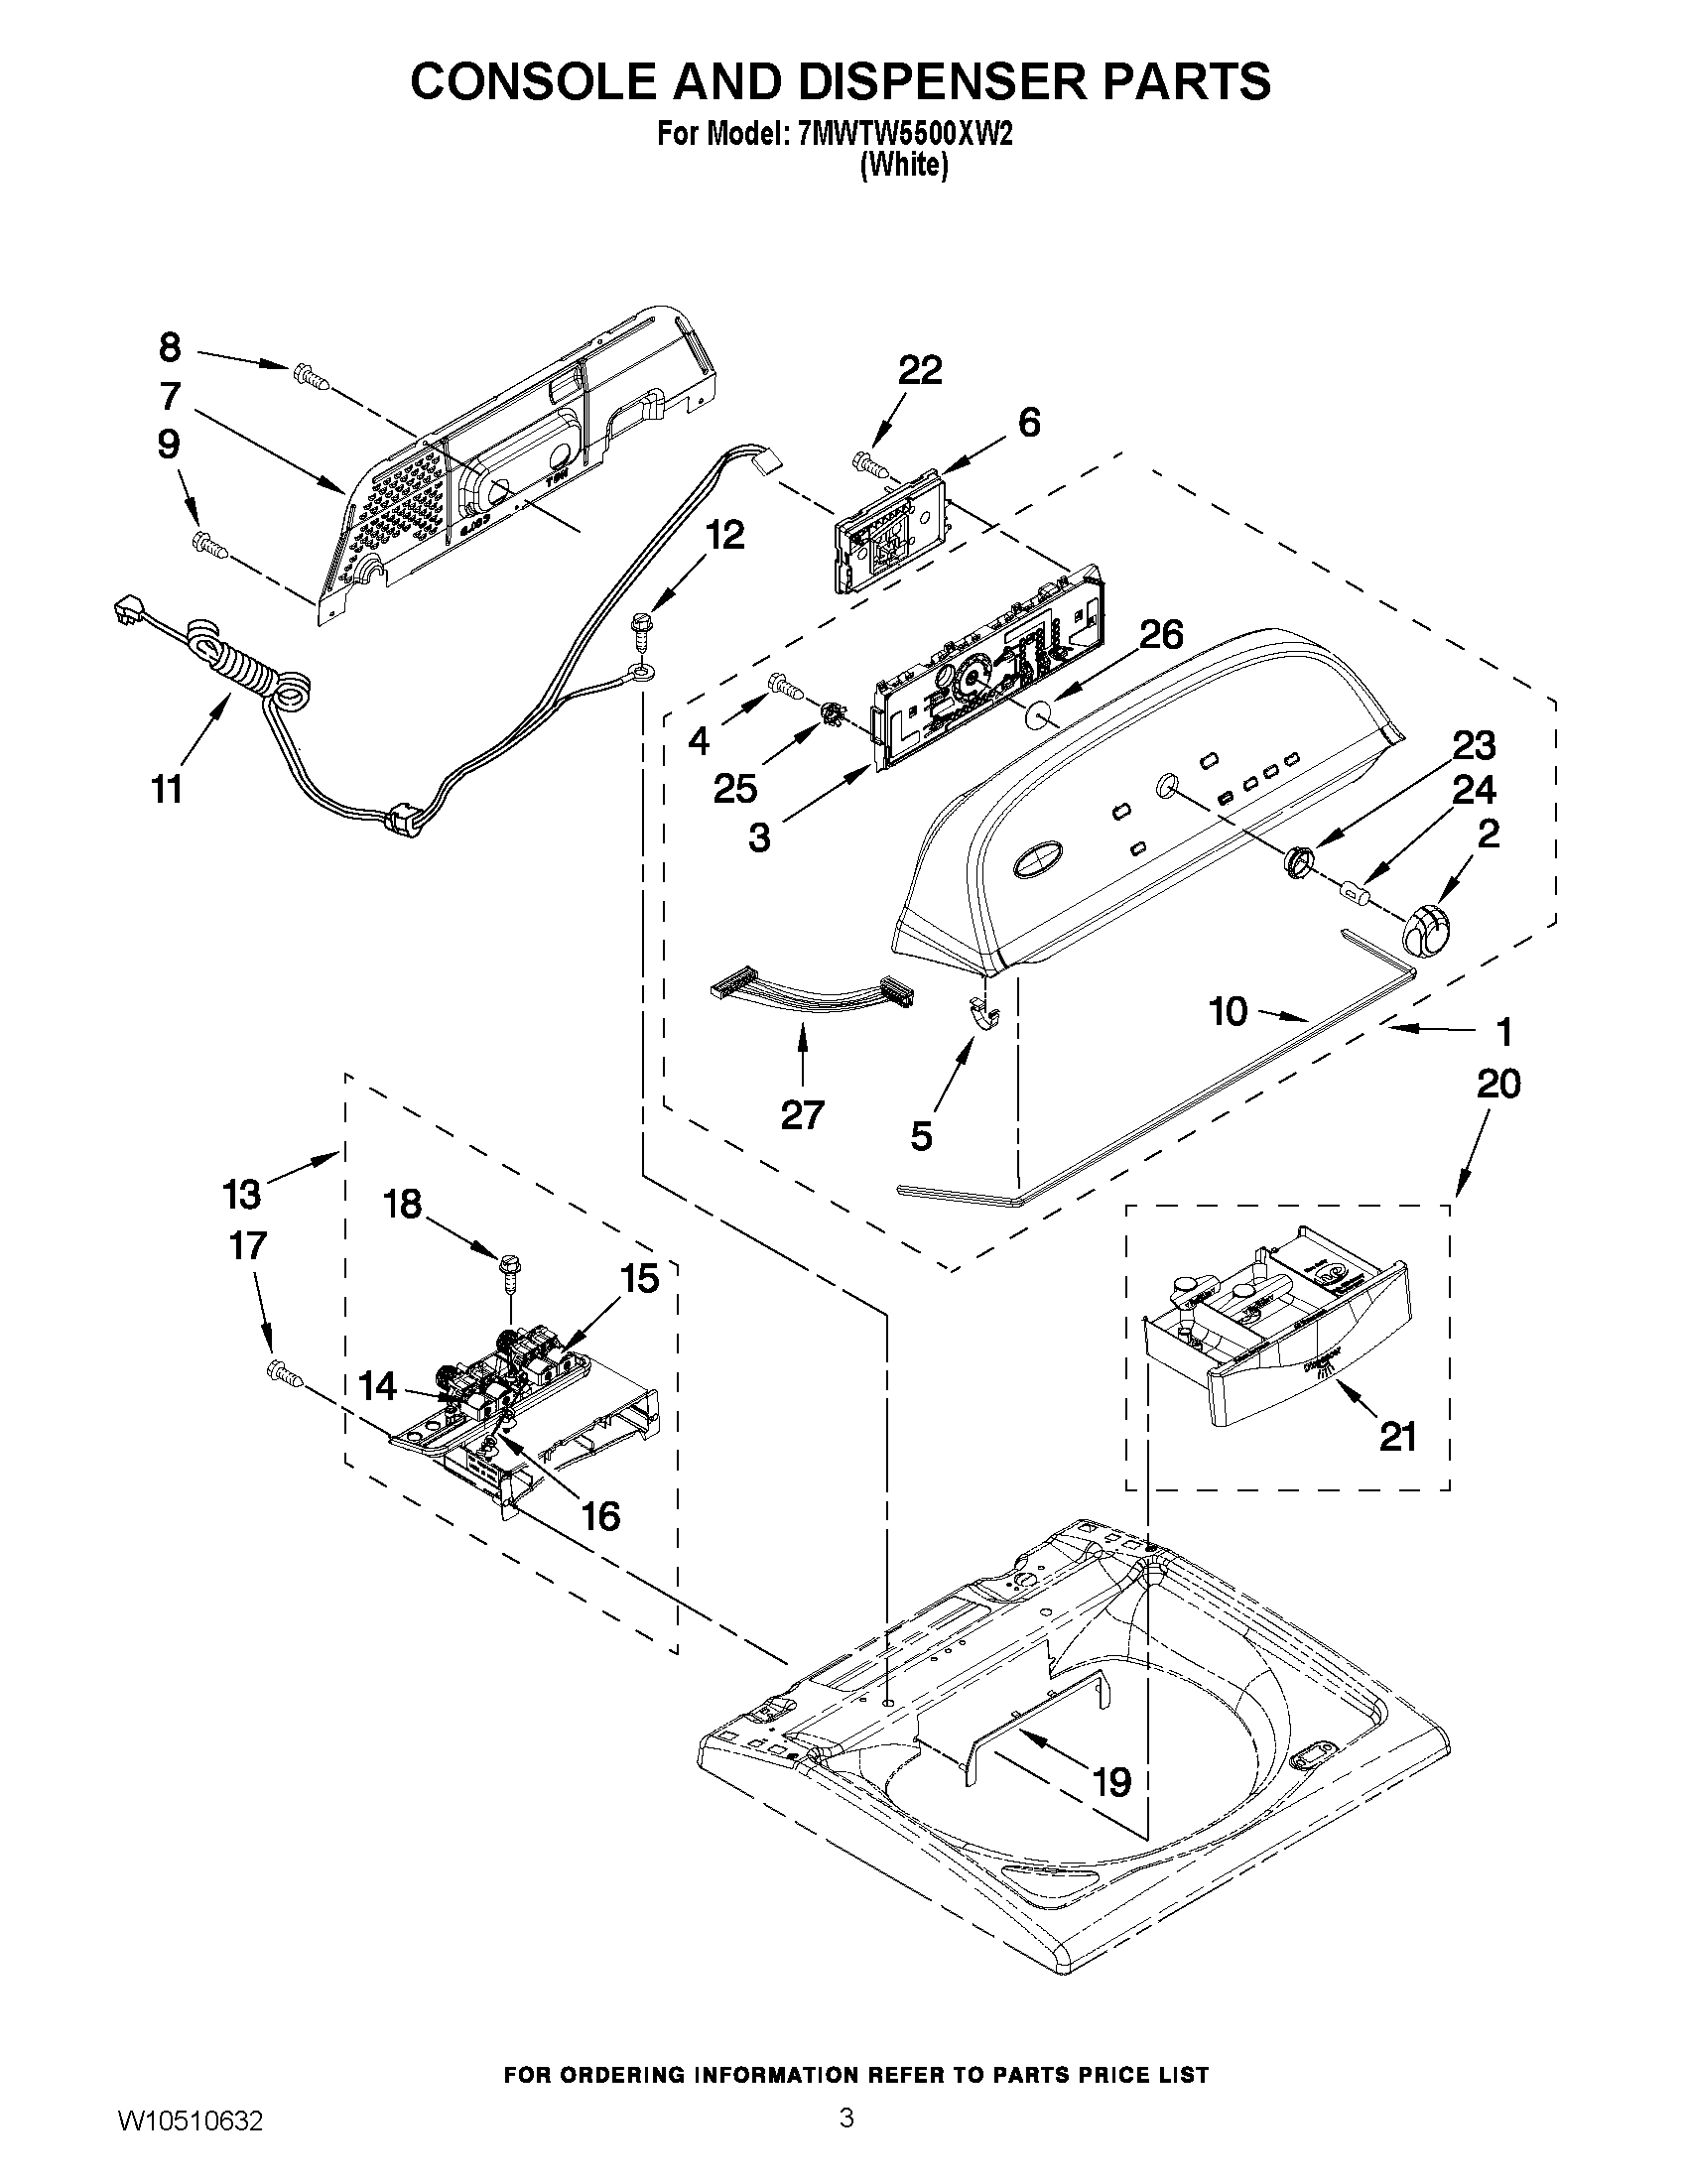 02 - CONSOLE AND WATER INLET PARTS